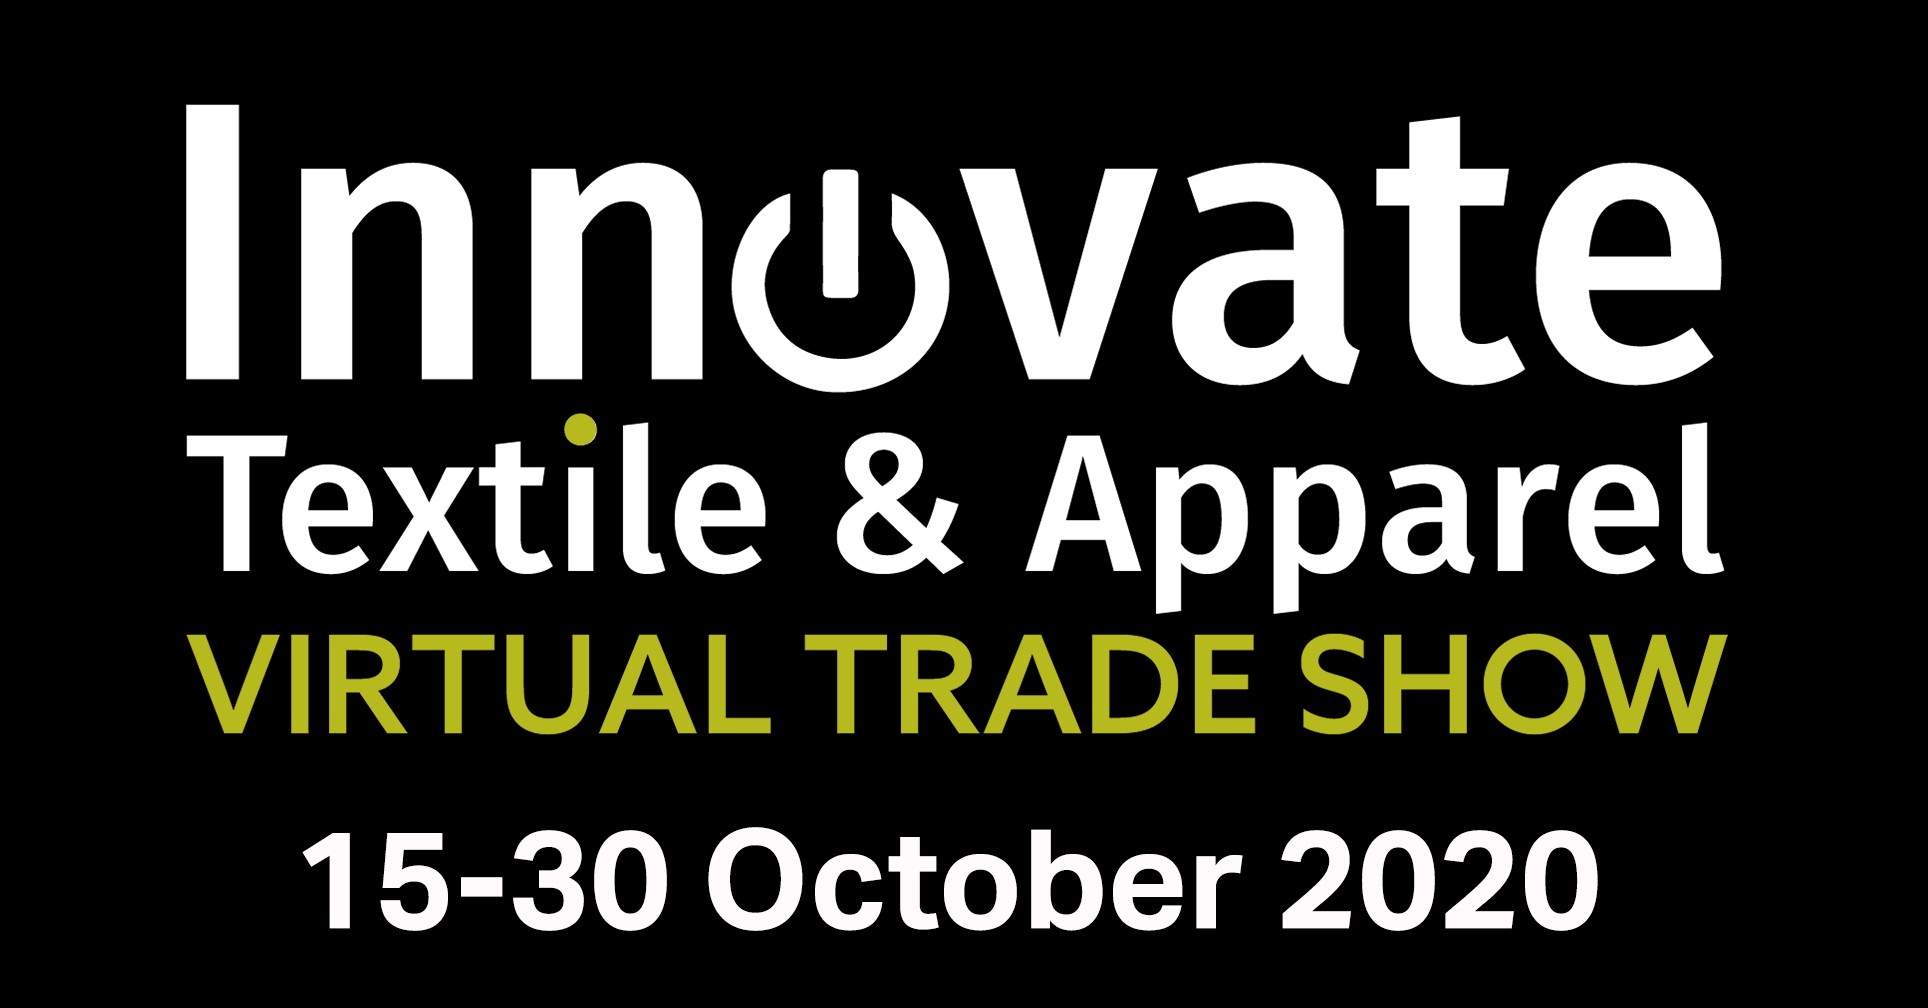 Khoyout partners with Innovative Textile & Apparel Virtual Trade Show